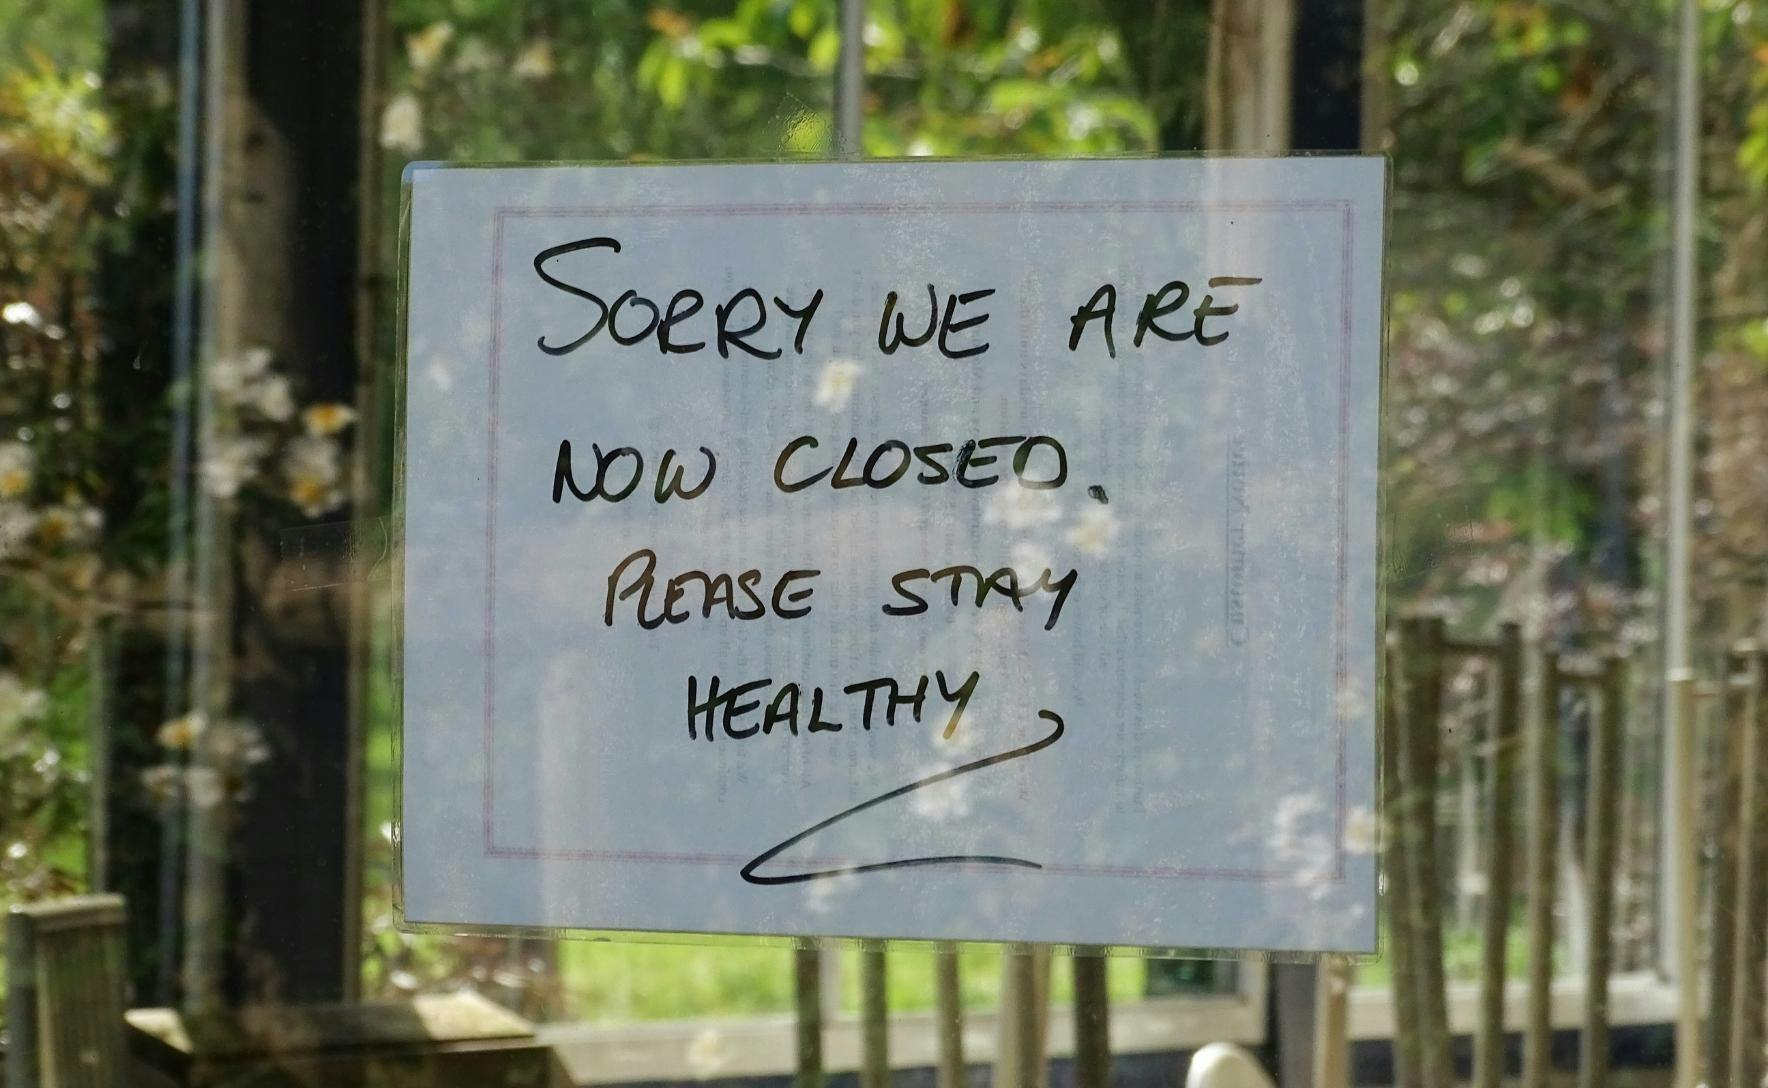 Sign on a glass door reads: sorry we are closed, please stay healthy.